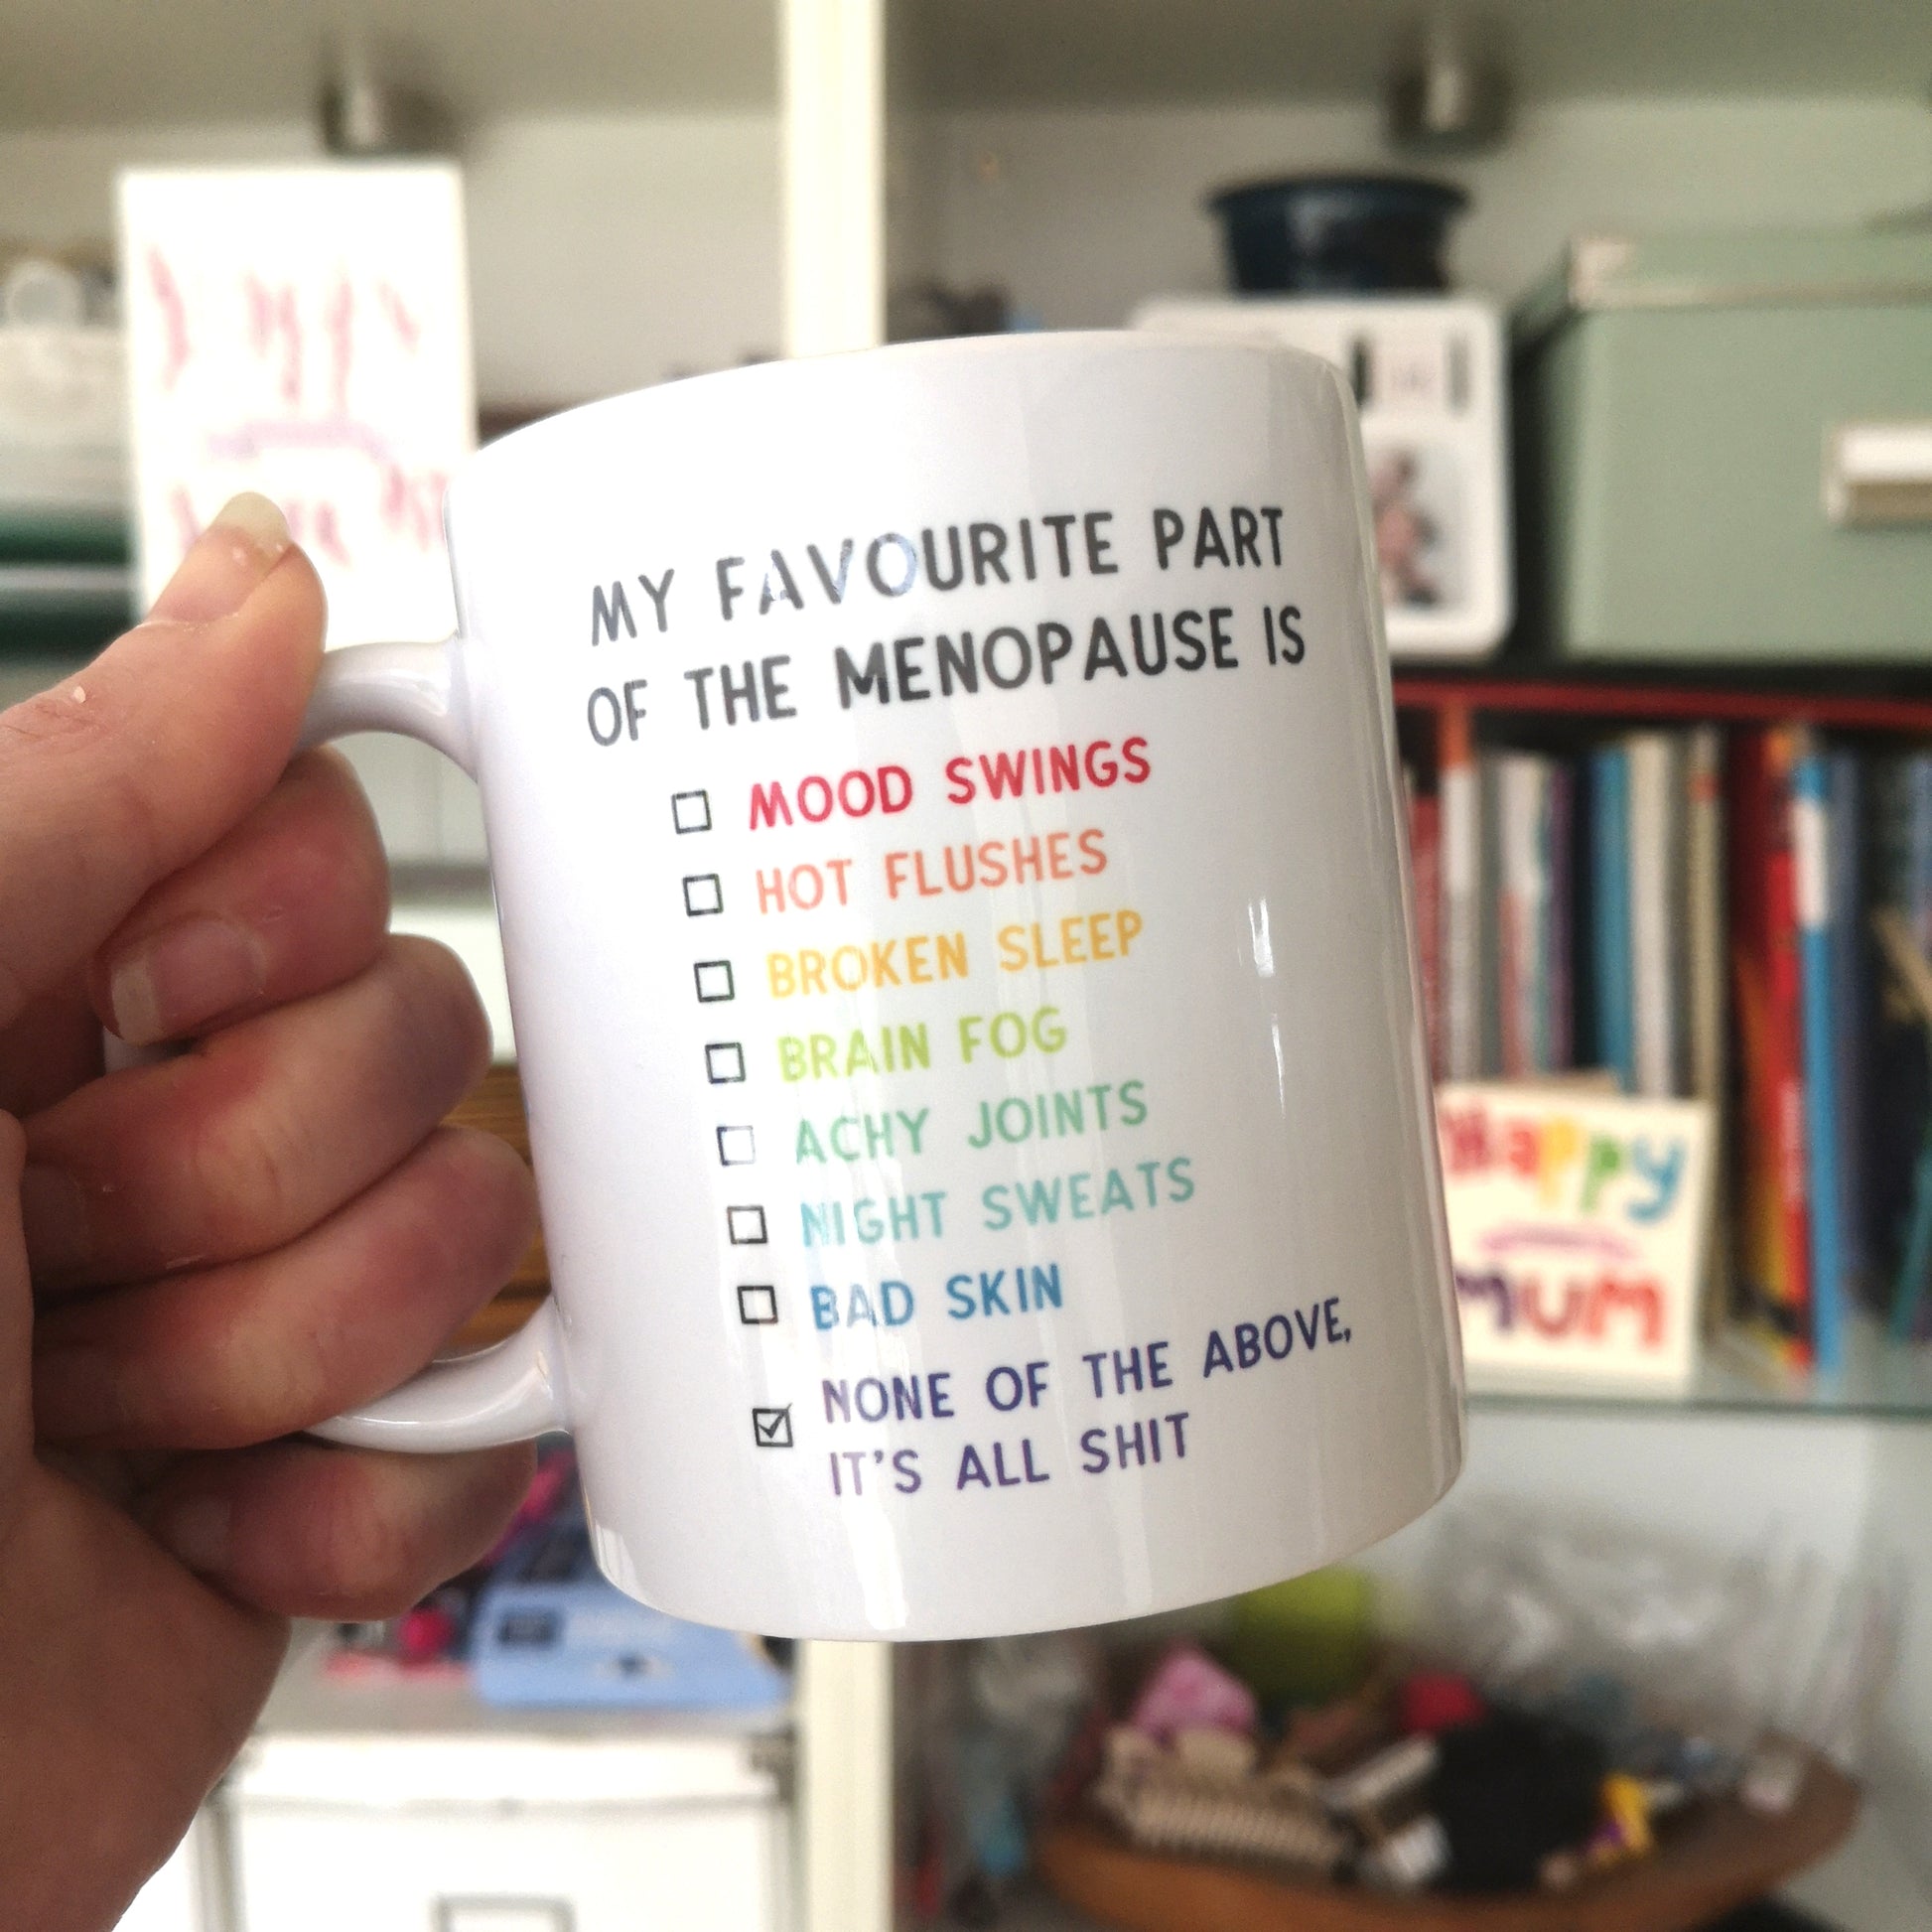 A white ceramic mug with 'My favourite part of the menopause is...' and a list of some of its wonderful symptoms.  Obviously the one ticked is 'None of the above. It's all shit', as it is all fairly shit!